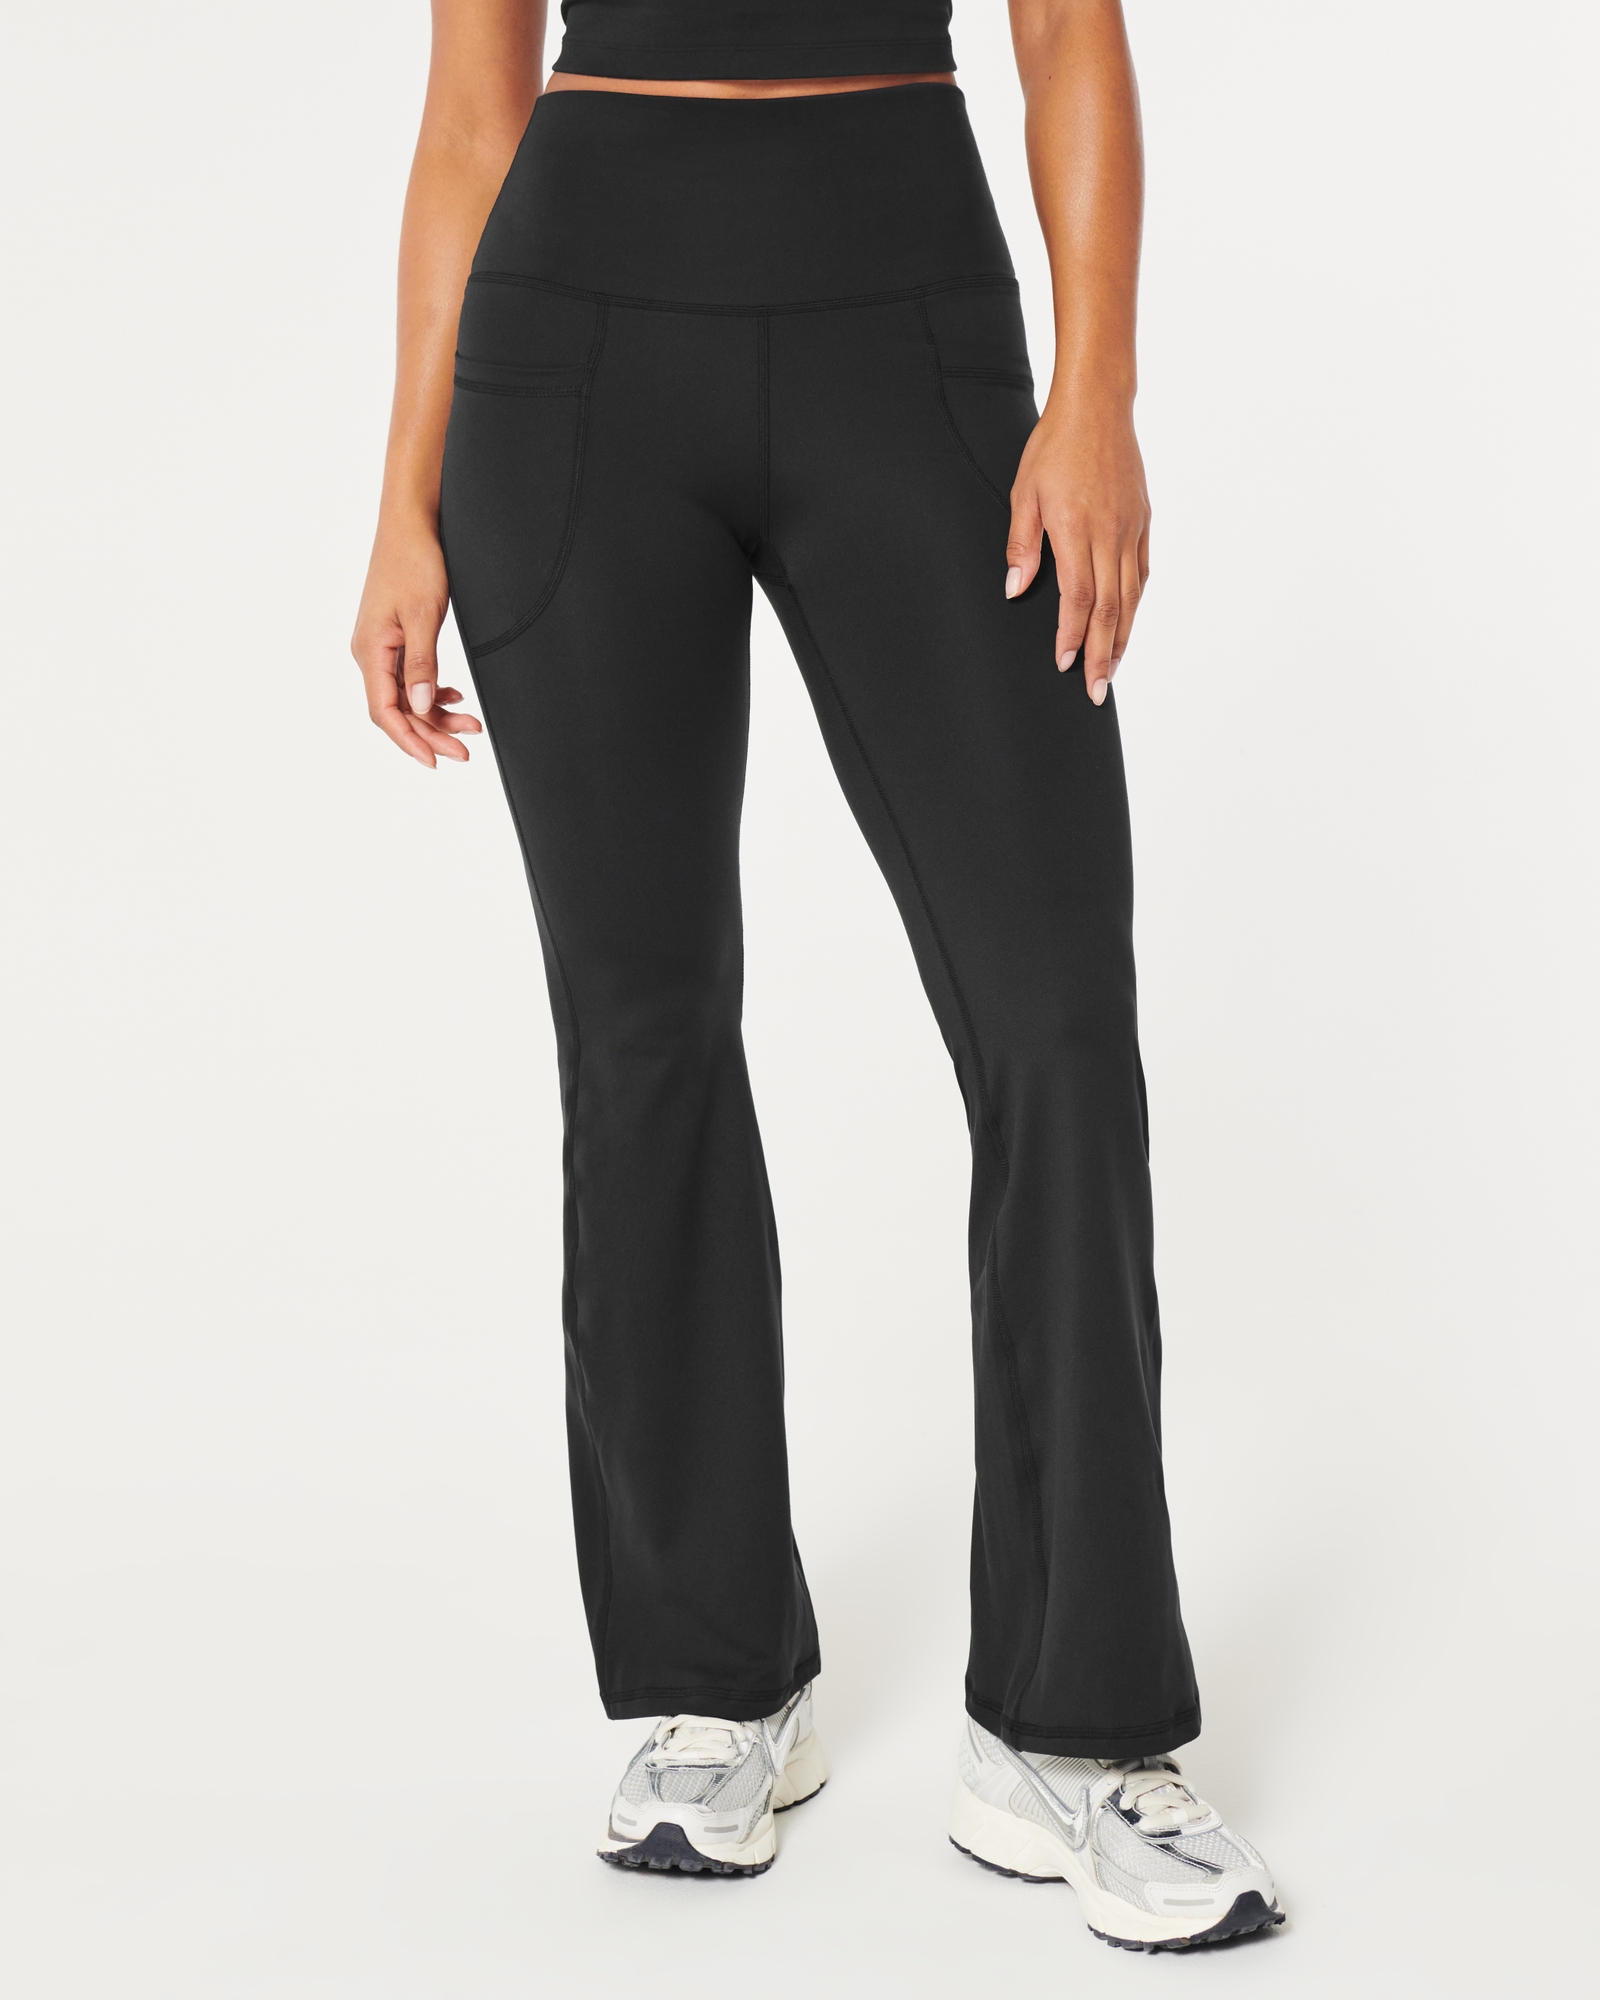 Hollister Black Criss-Cross Flared Leggings - $15 (57% Off Retail) New With  Tags - From J